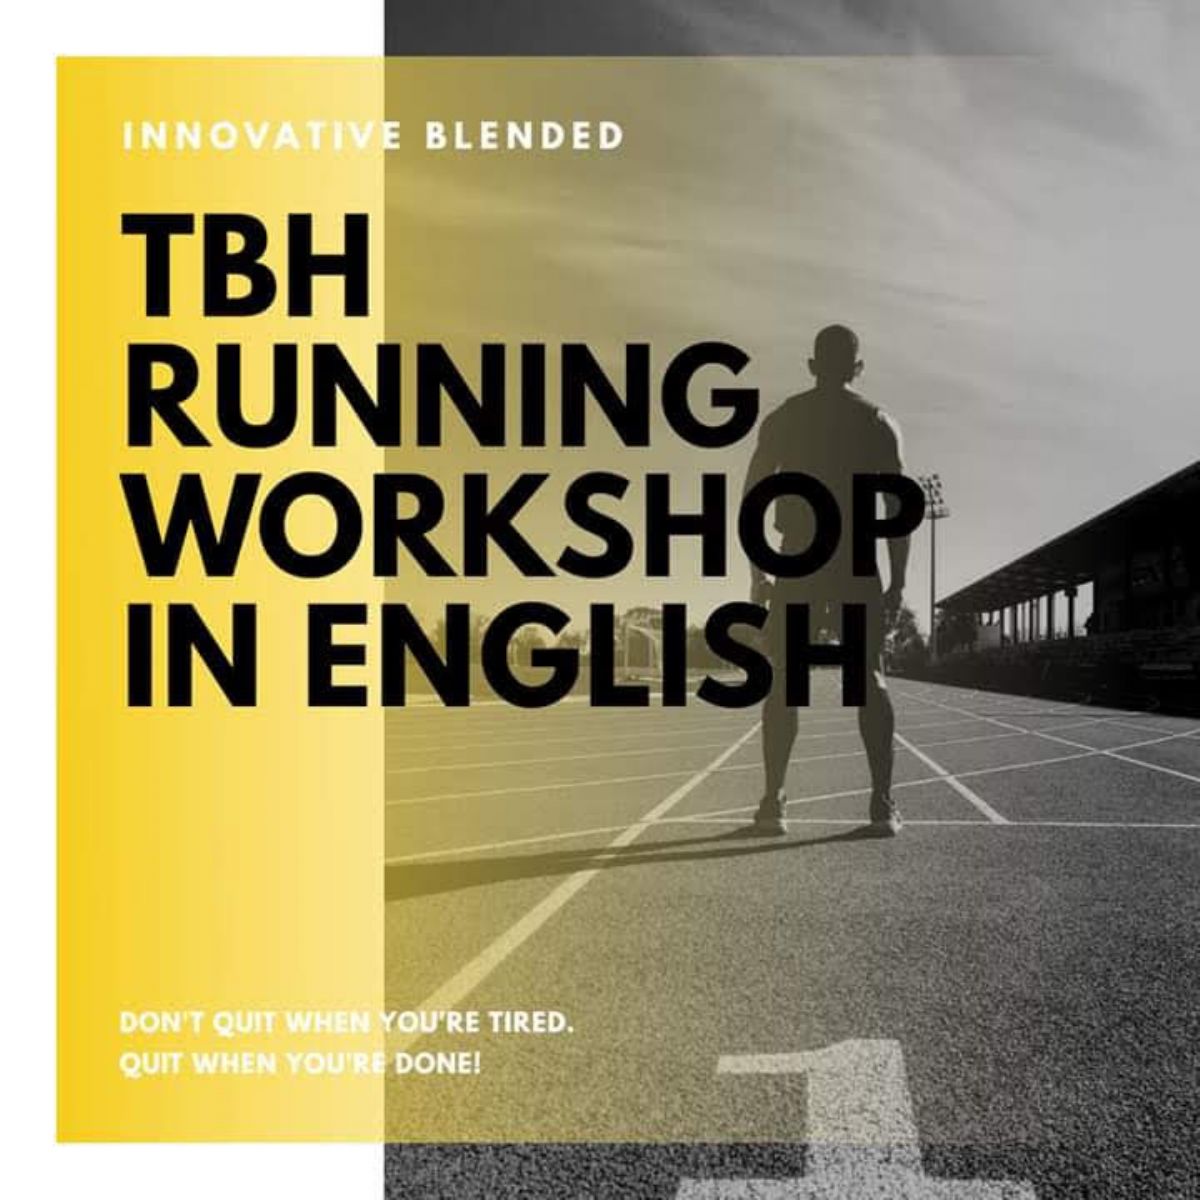 Intensive TBH RUNNING TECHNIQUE WORKSHOP IN ENGLISH